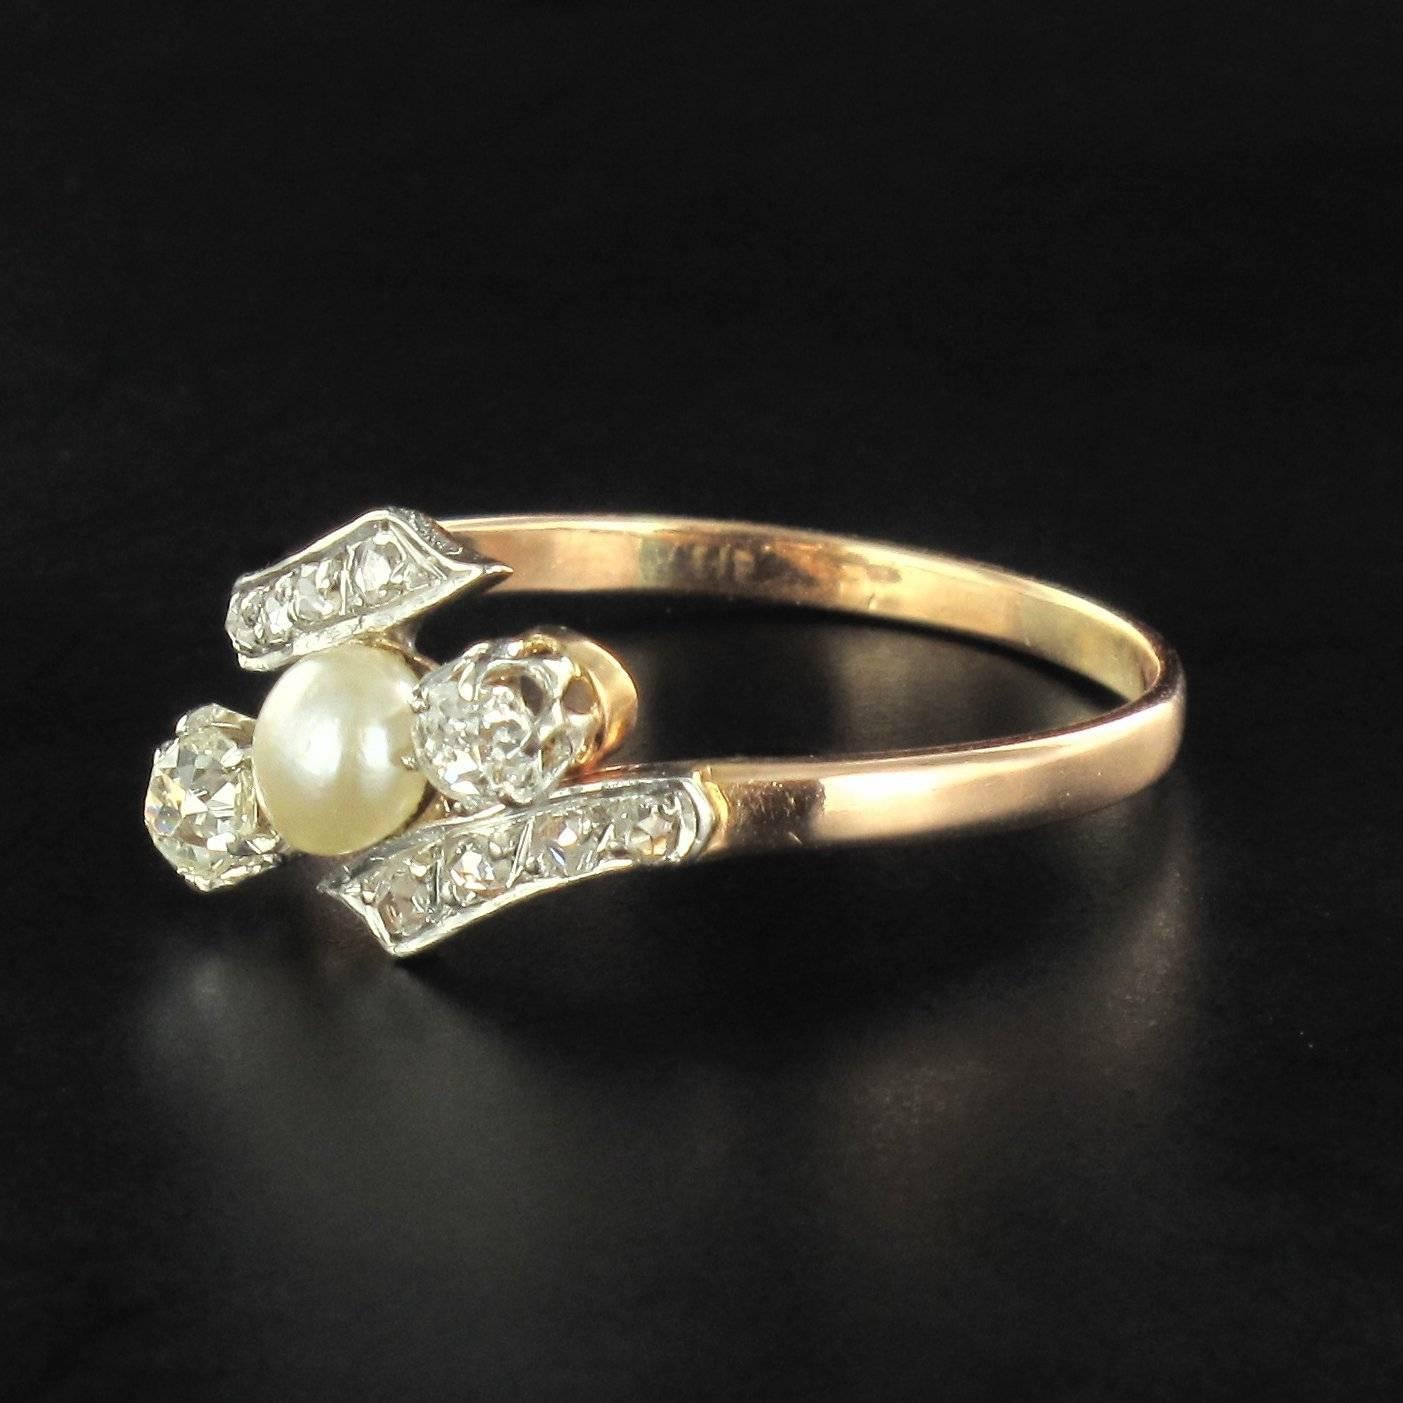 Ring in 18K rose gold, horse head hallmark.
Set with a fine round pearl with an antique brilliant cut diamond on each side. The beginning of the band is decorated at each side by 4 rose cut diamonds. 
Pearl diameter: 4.5 / 5mm, total diamond weight: